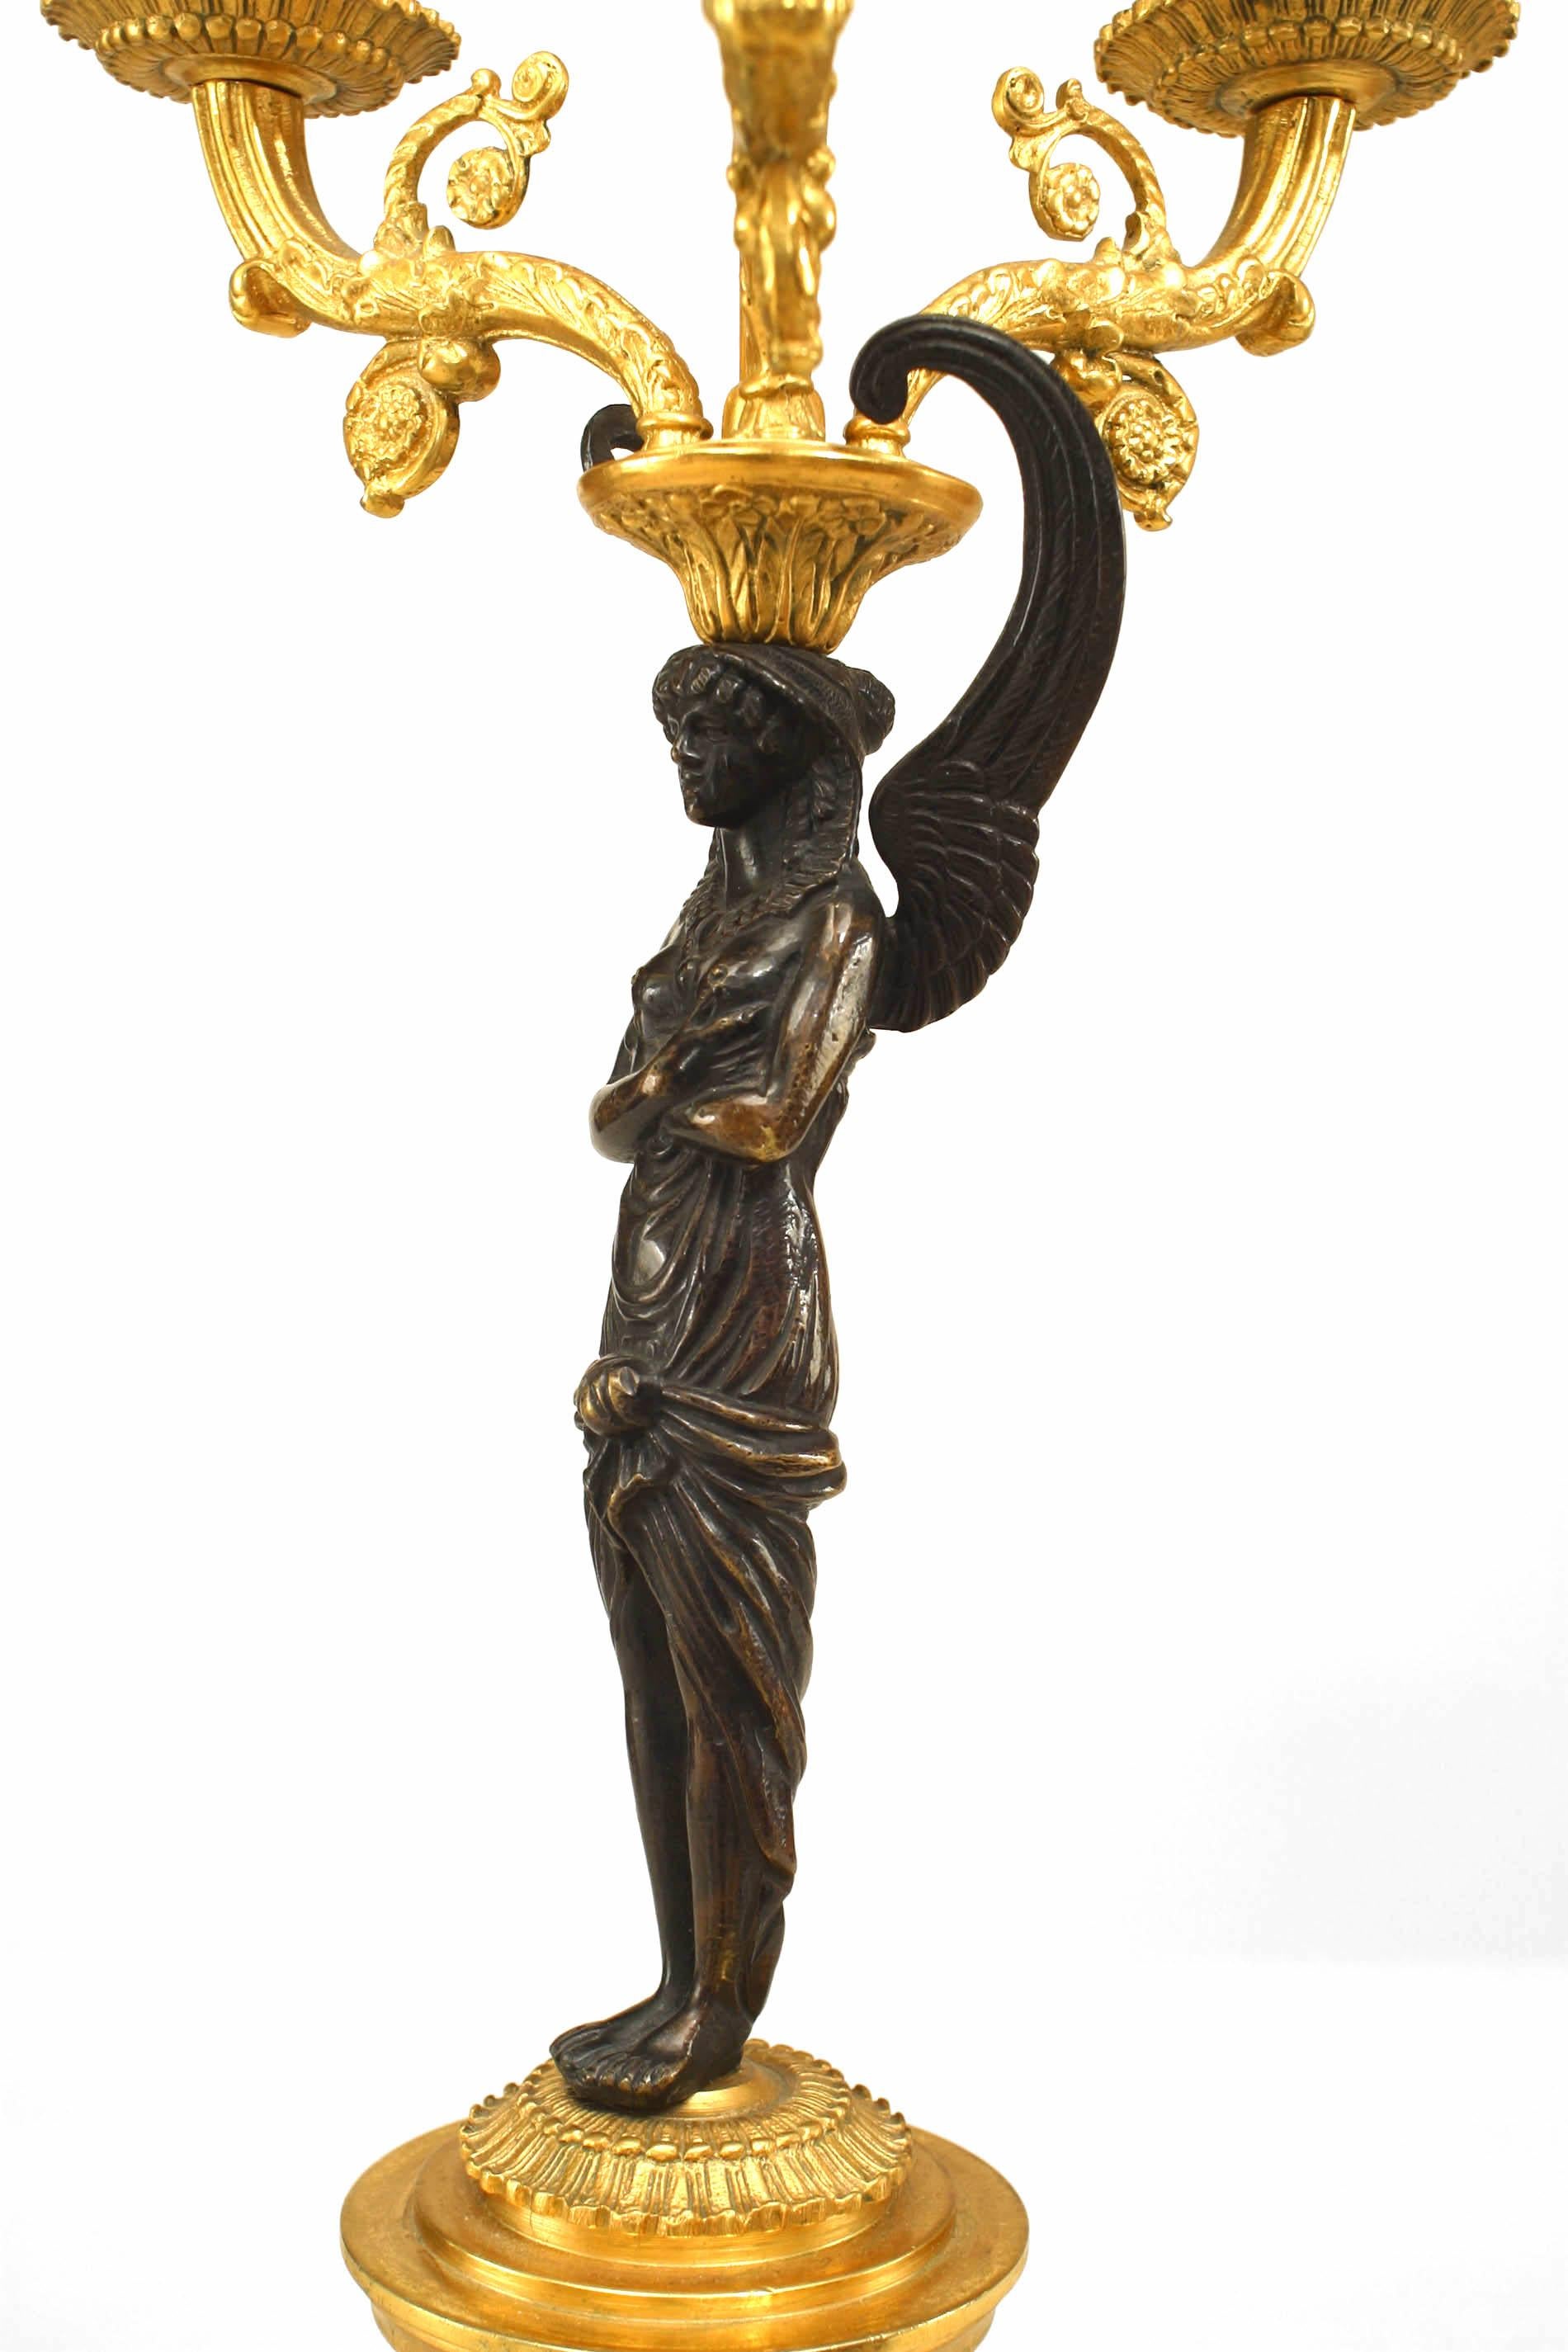 Pair of French Empire-style (20th century) gilt and patinated bronze 3 light candelabra with winged figural columns and flame finial on ormolu mounted base. (Priced as pair).
 